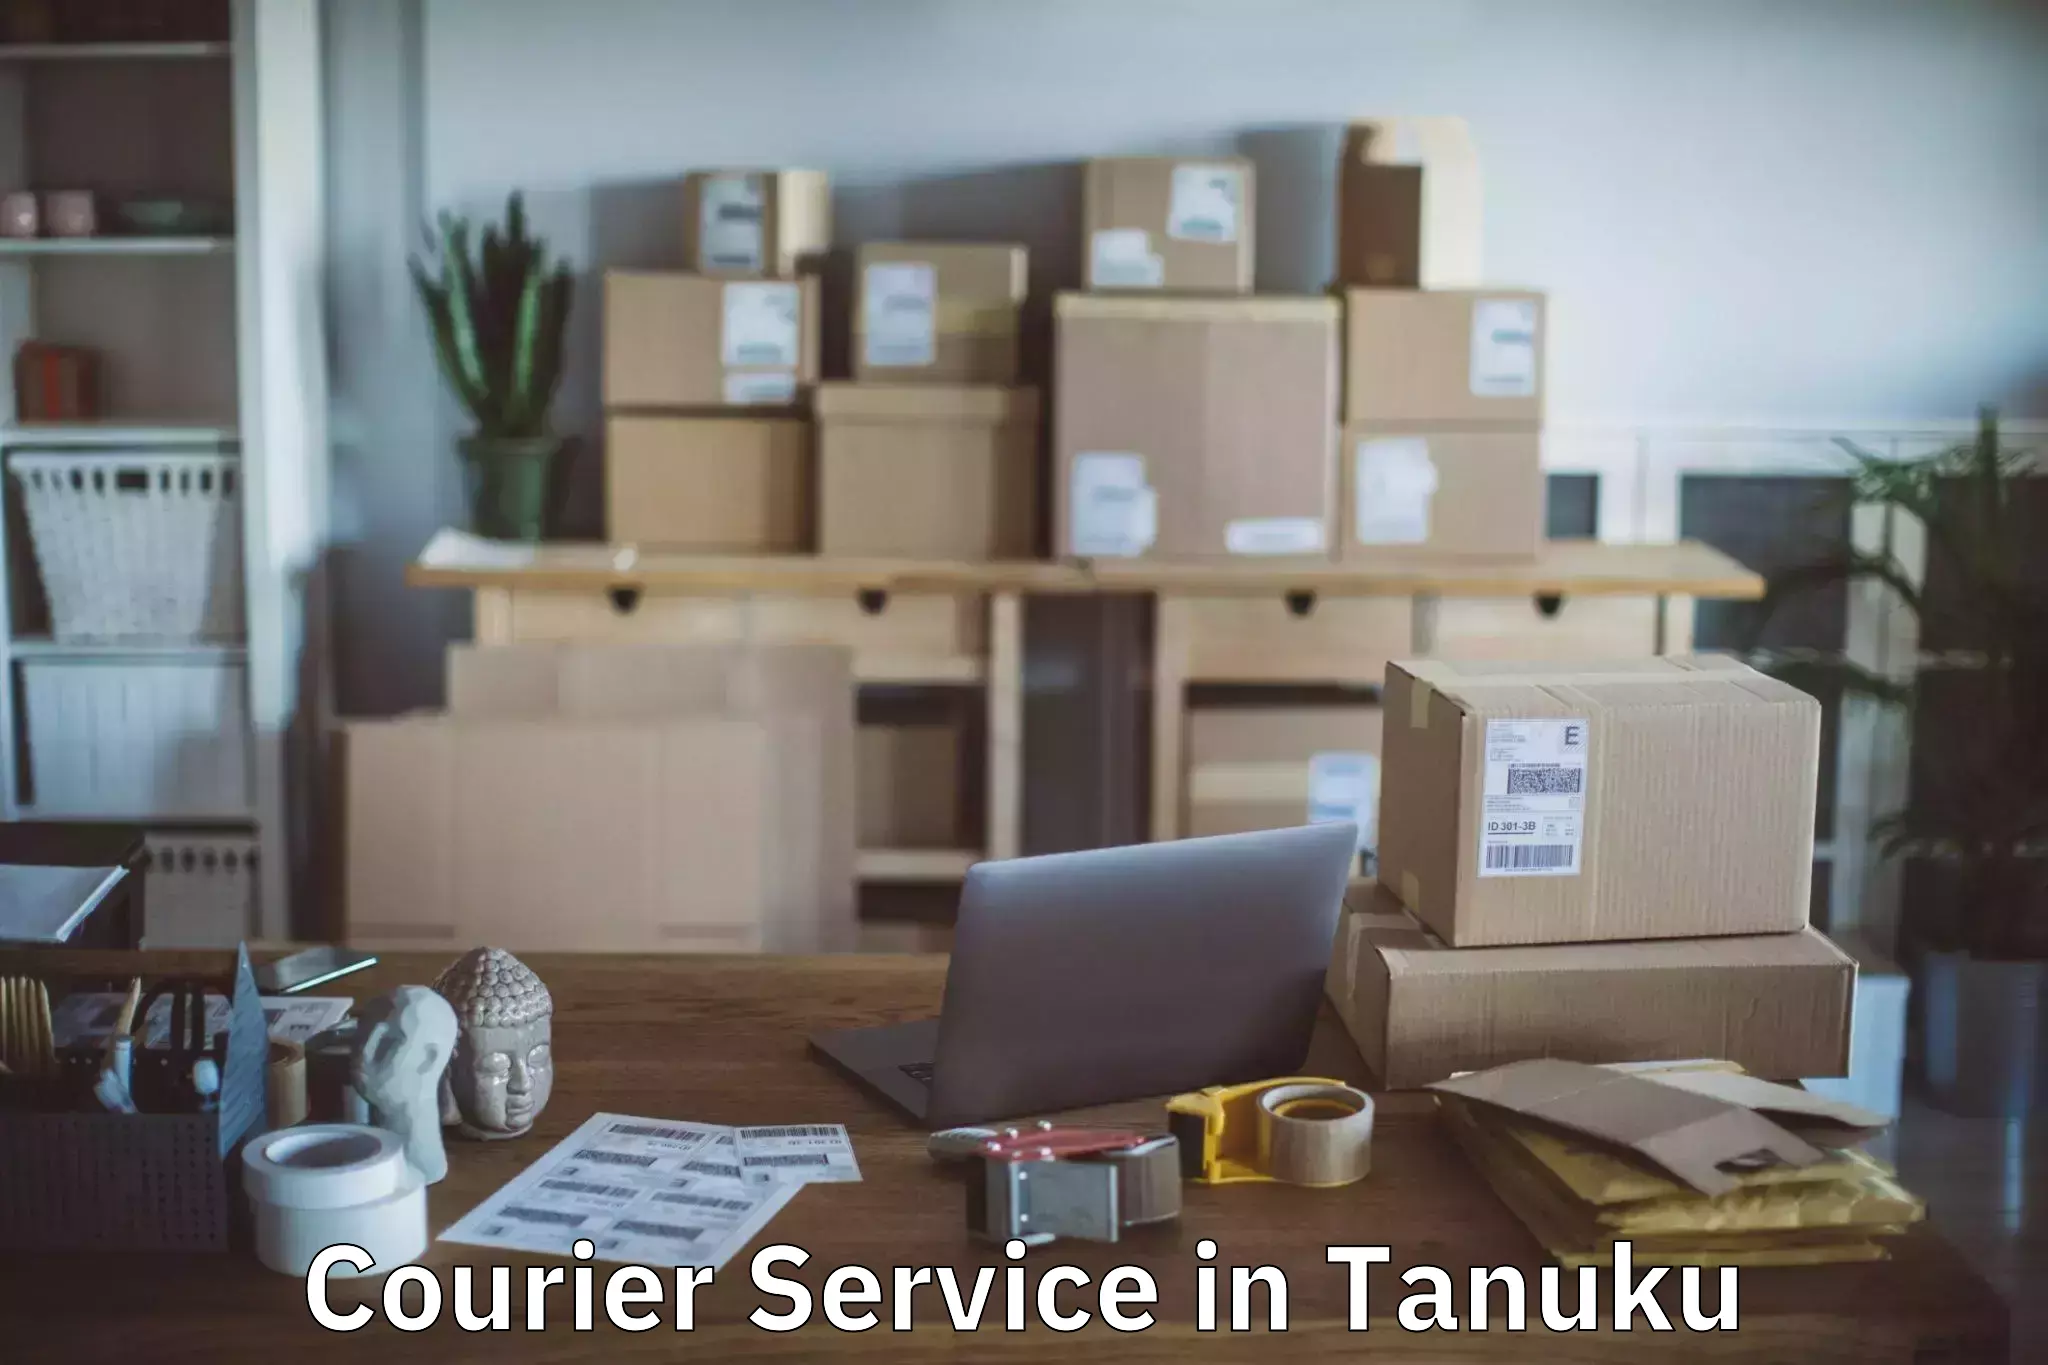 Courier service efficiency in Tanuku